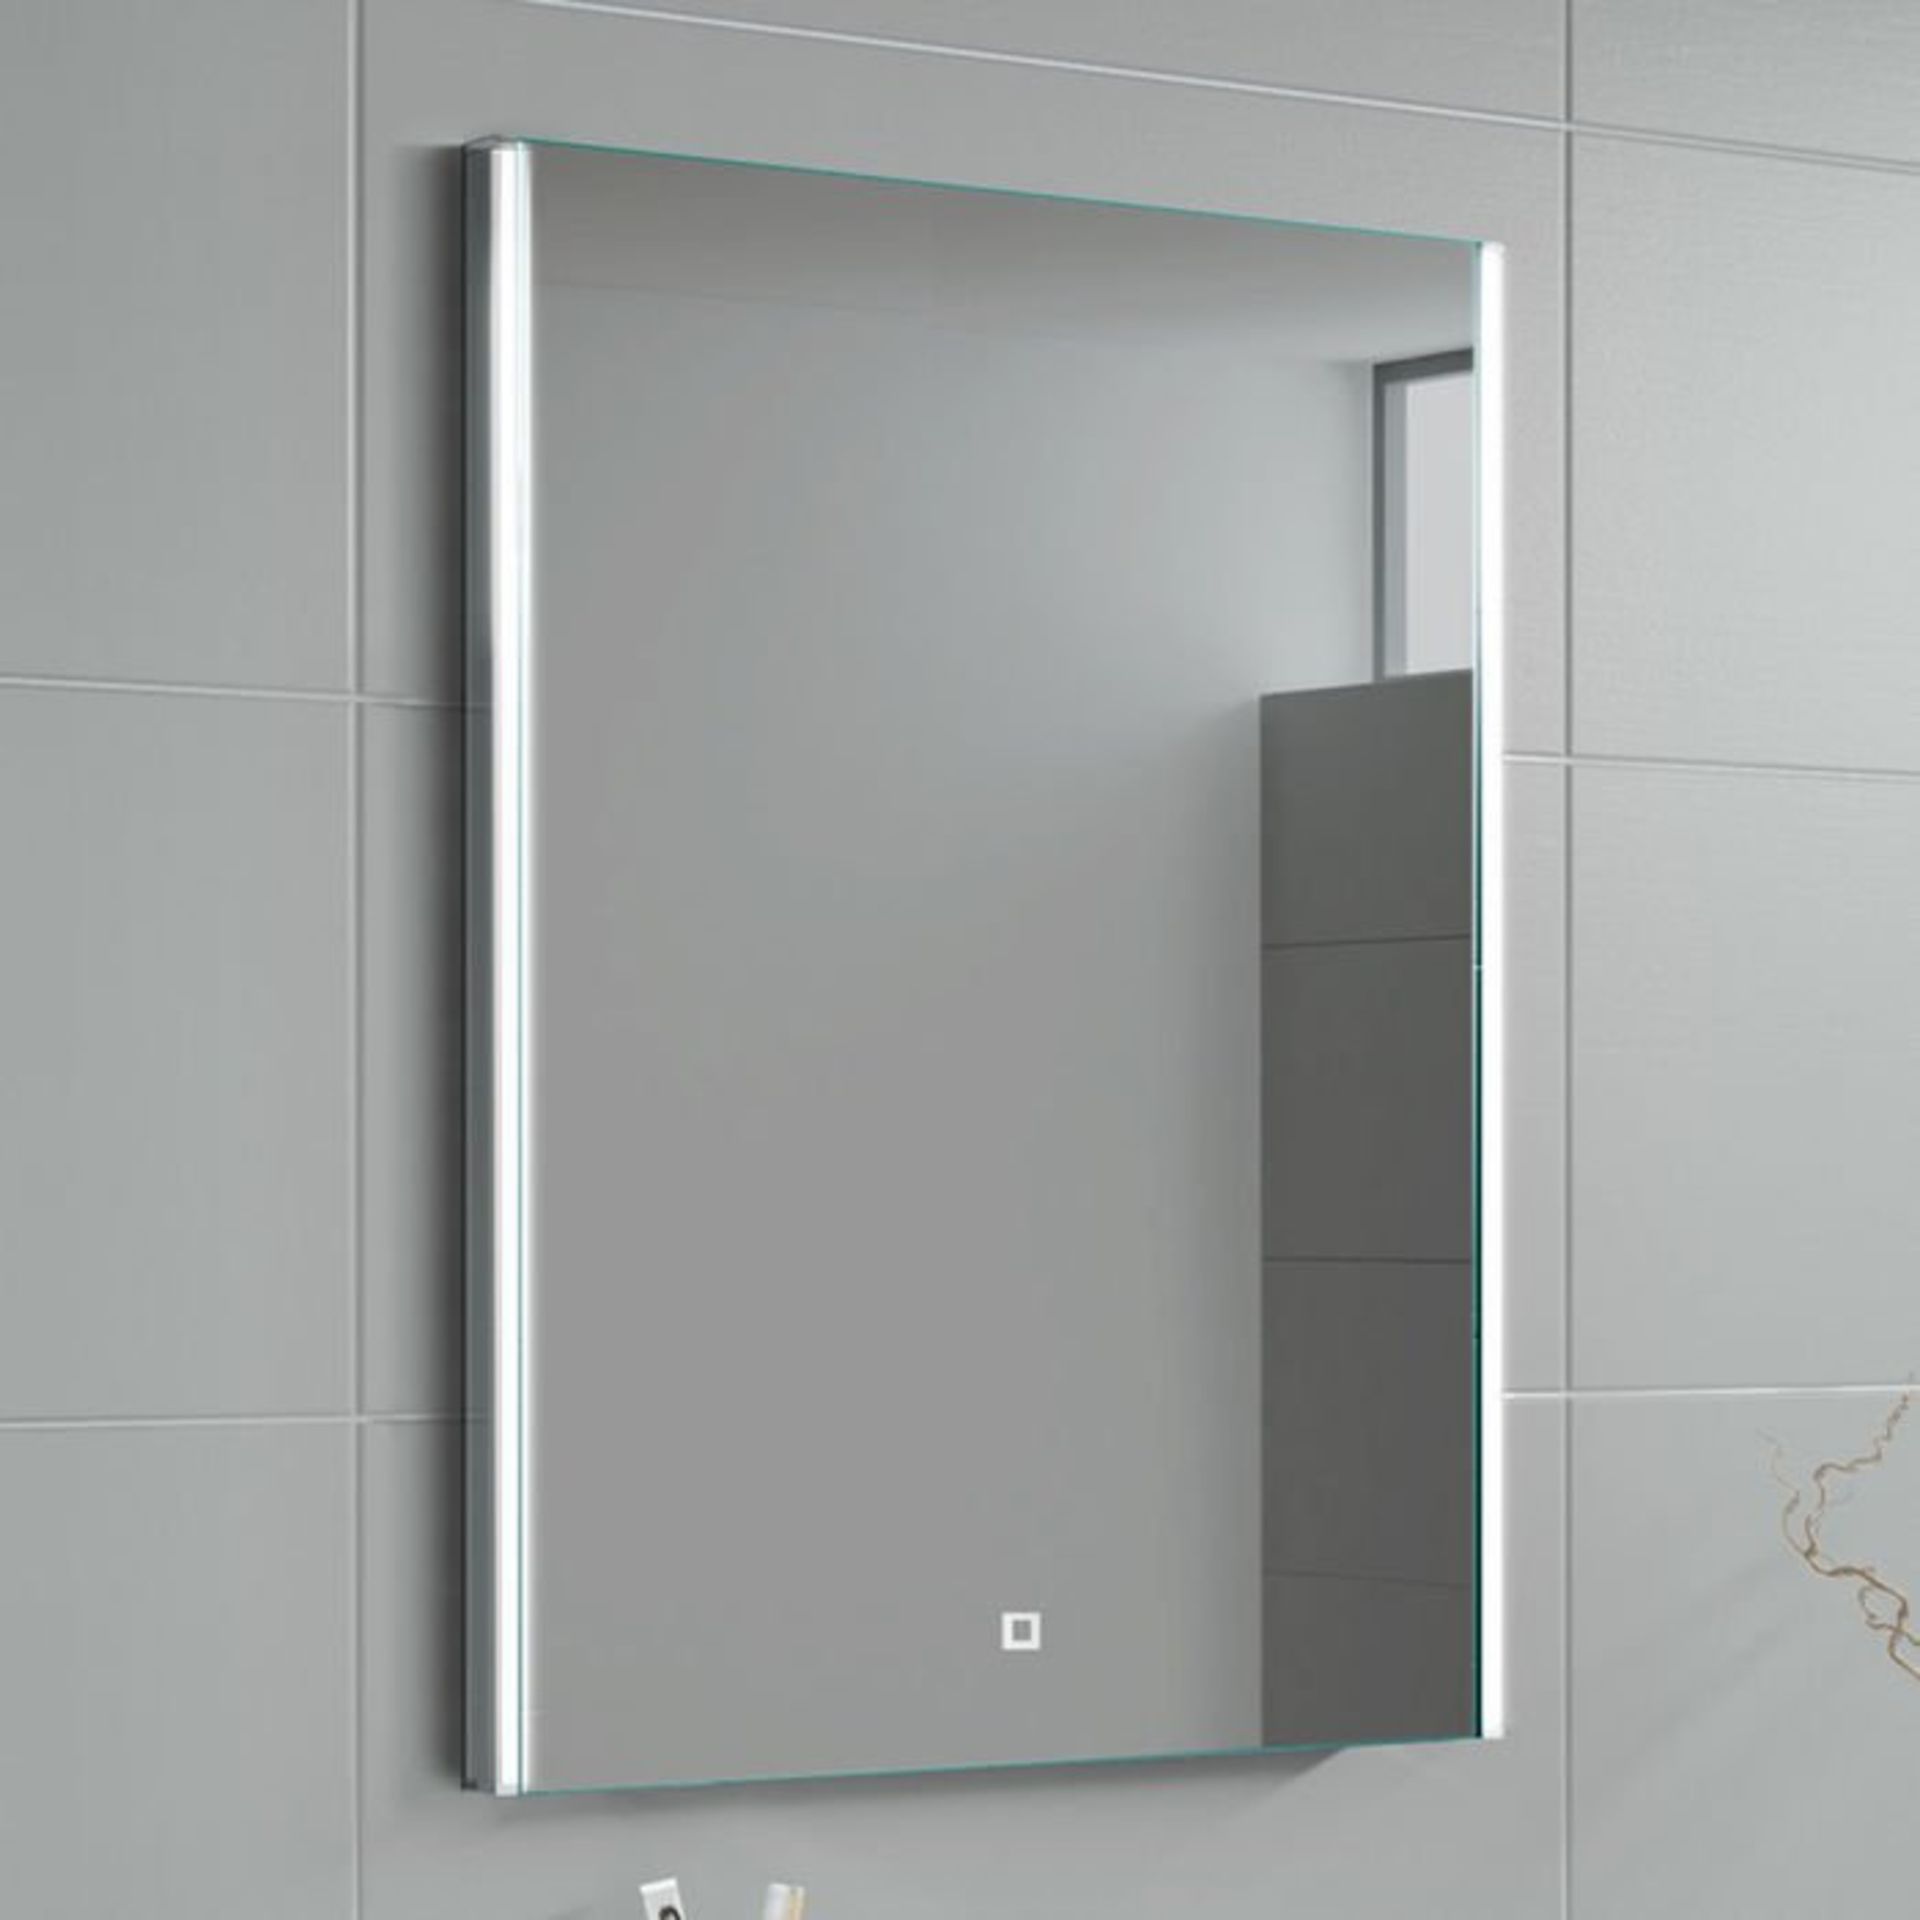 (H170) 700x500mm Lunar Illuminated LED Mirror - Switch Control. RRP £349.99. Energy efficient LED - Image 5 of 5